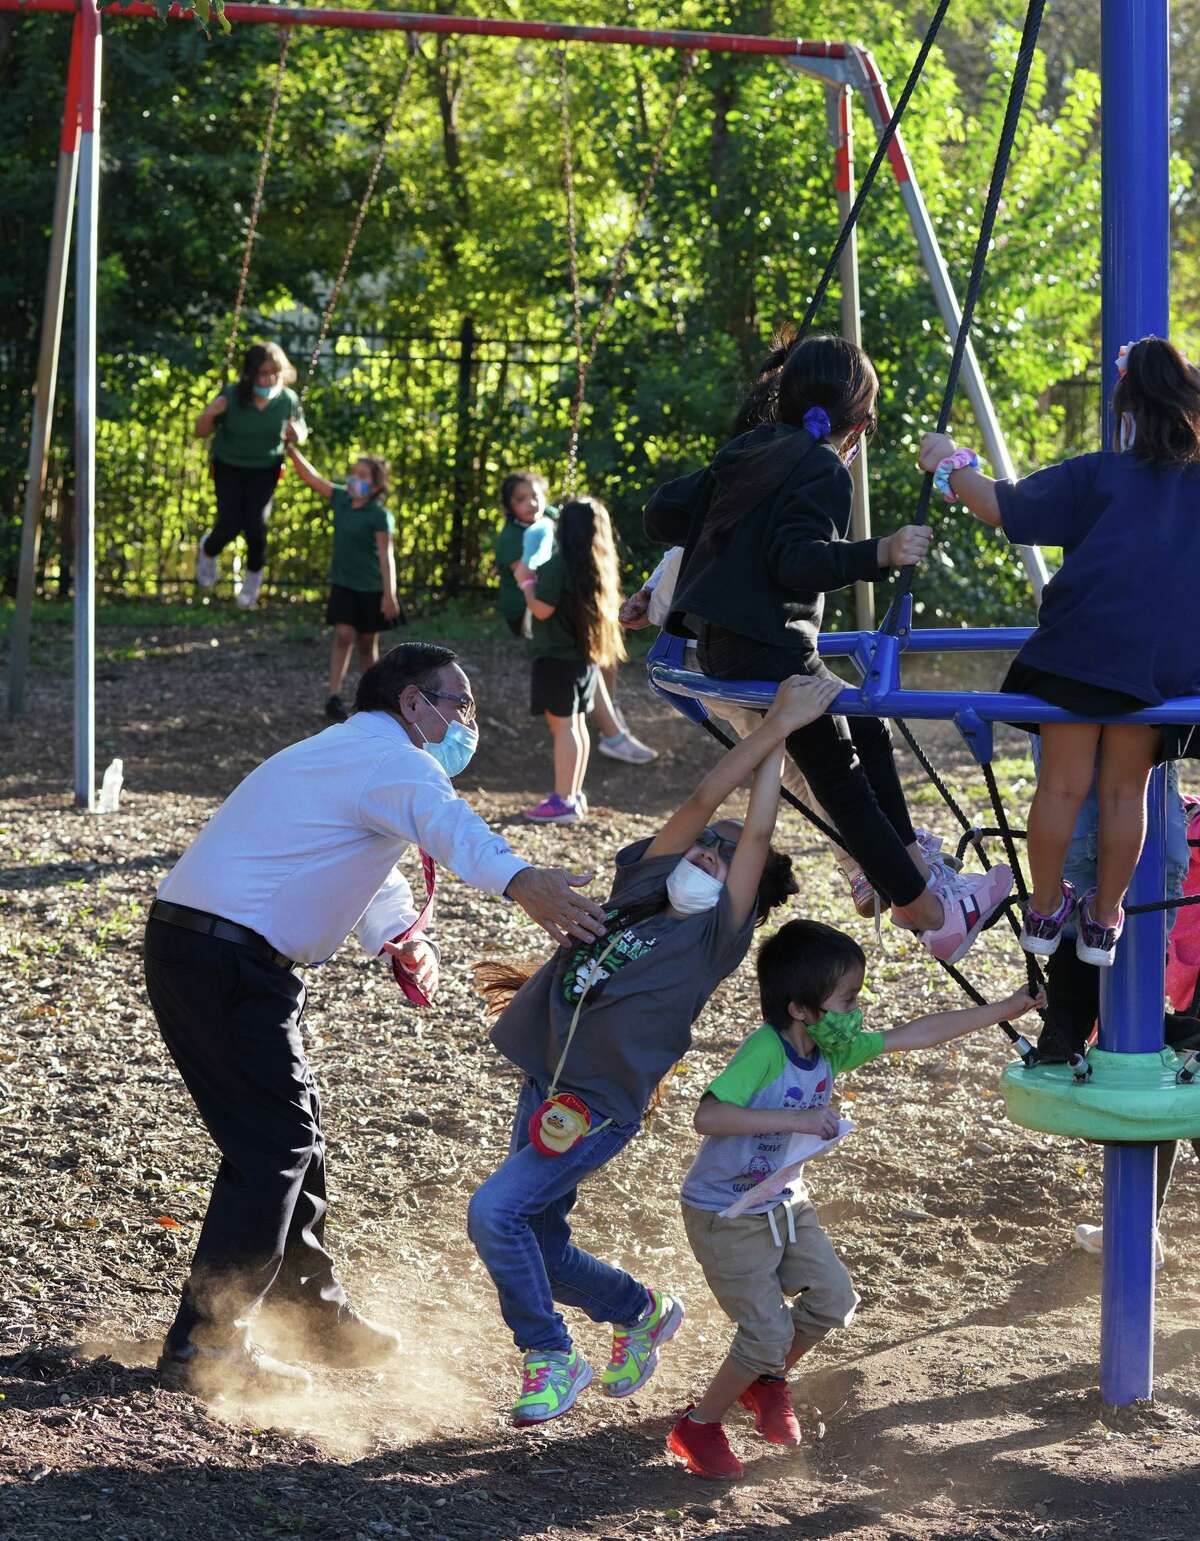 Simon Salas, CEO of Good Samaritan Community Services, participates in outdoor activities with the children he oversees at the nonprofit, which offers programs to support children, seniors and low-income residents in the West Side neighborhood where he grew up.